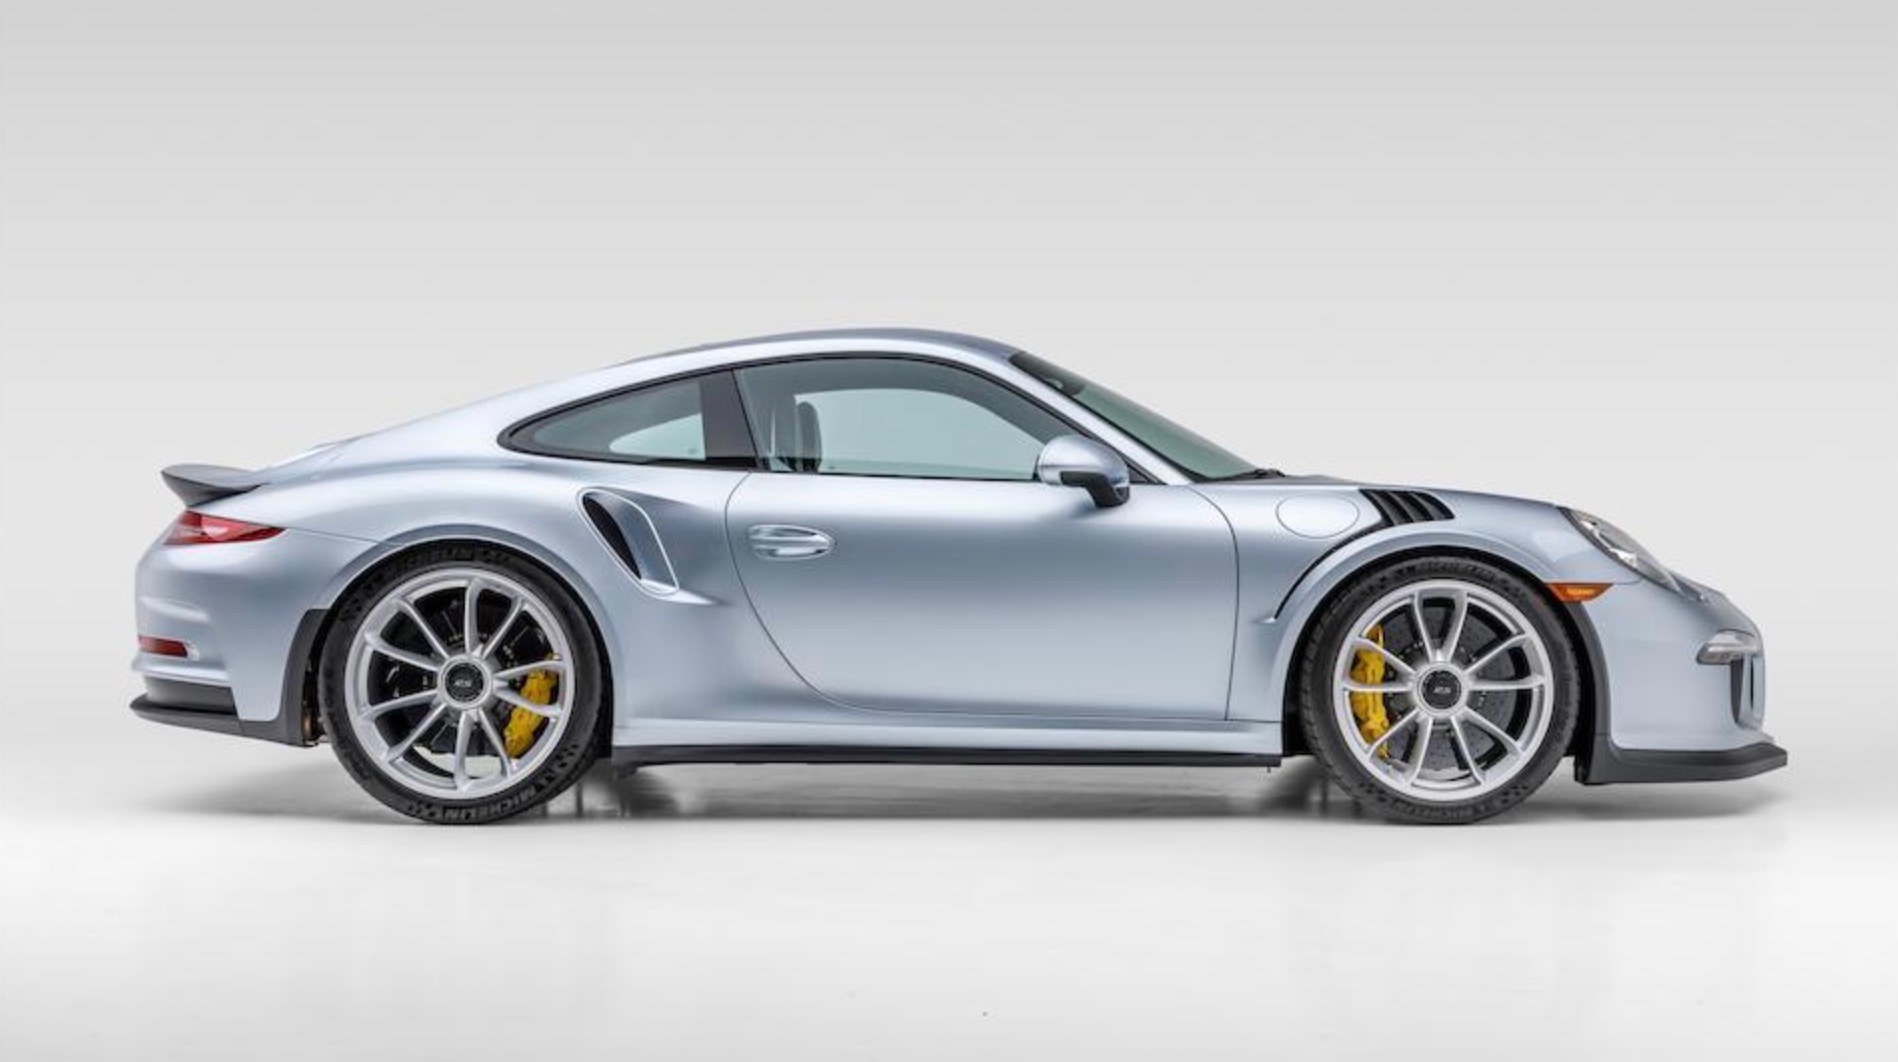 For Sale: 2016 Porsche 911 GT3 RS owned by Jerry Seinfeld